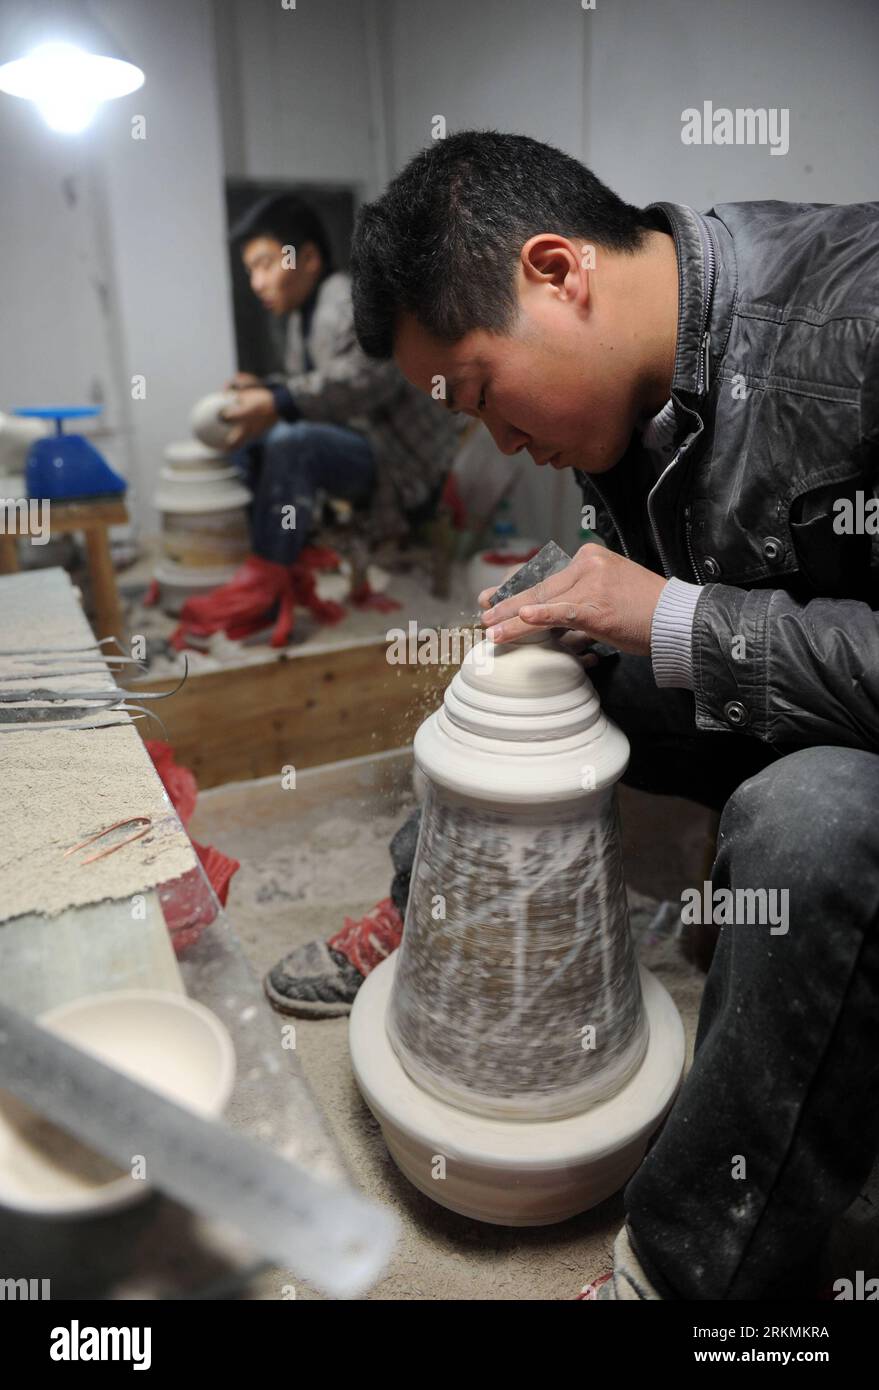 Bildnummer: 56778411  Datum: 21.12.2011  Copyright: imago/Xinhua (111223) -- JINGDEZHEN, Dec. 23, 2011 (Xinhua) -- A technician works on an adobe on a clay-strip machine at a procelain workshop in Porcelain Capital Jingdezhen City, east China s Jiangxi Province, Dec. 21, 2011. Jingdezhen s percelain has been famous not only in China but in time it became known internationally for being as thin as paper, as white as jade, as bright as a mirror, and as sound as a bell. (Xinhua/Zhou Ke) (xzj) CHINA-JIANGXI-JINGDEZHEN-PORCELAIN (CN) PUBLICATIONxNOTxINxCHN Wirtschaft Porzellan Arbeitswelten Handwer Stock Photo